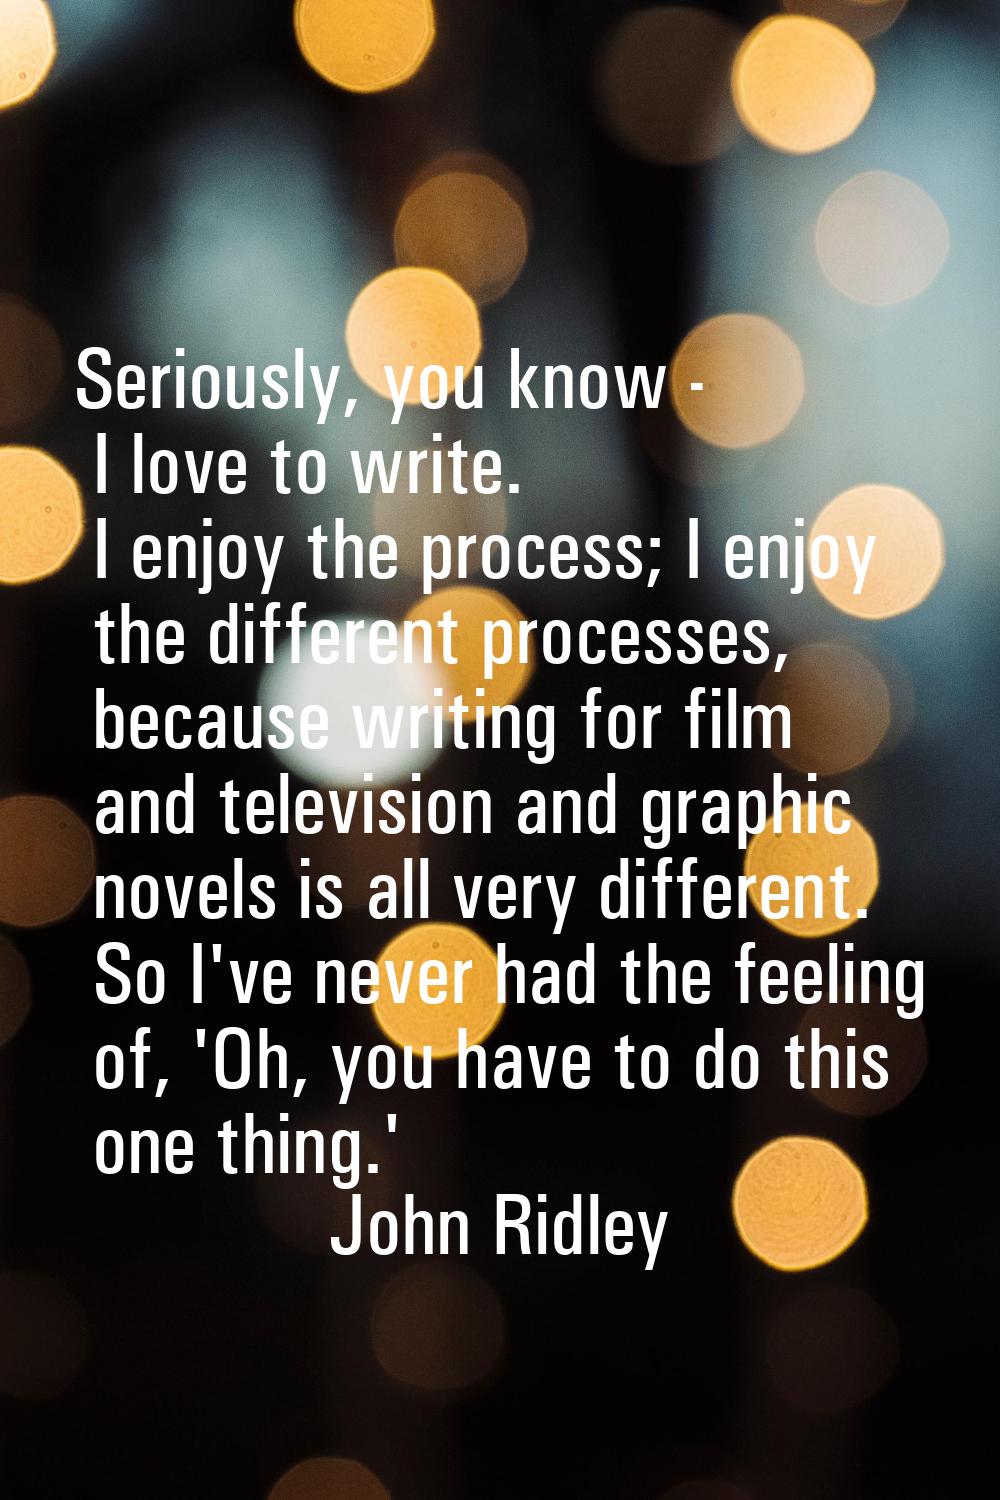 Seriously, you know - I love to write. I enjoy the process; I enjoy the different processes, becaus